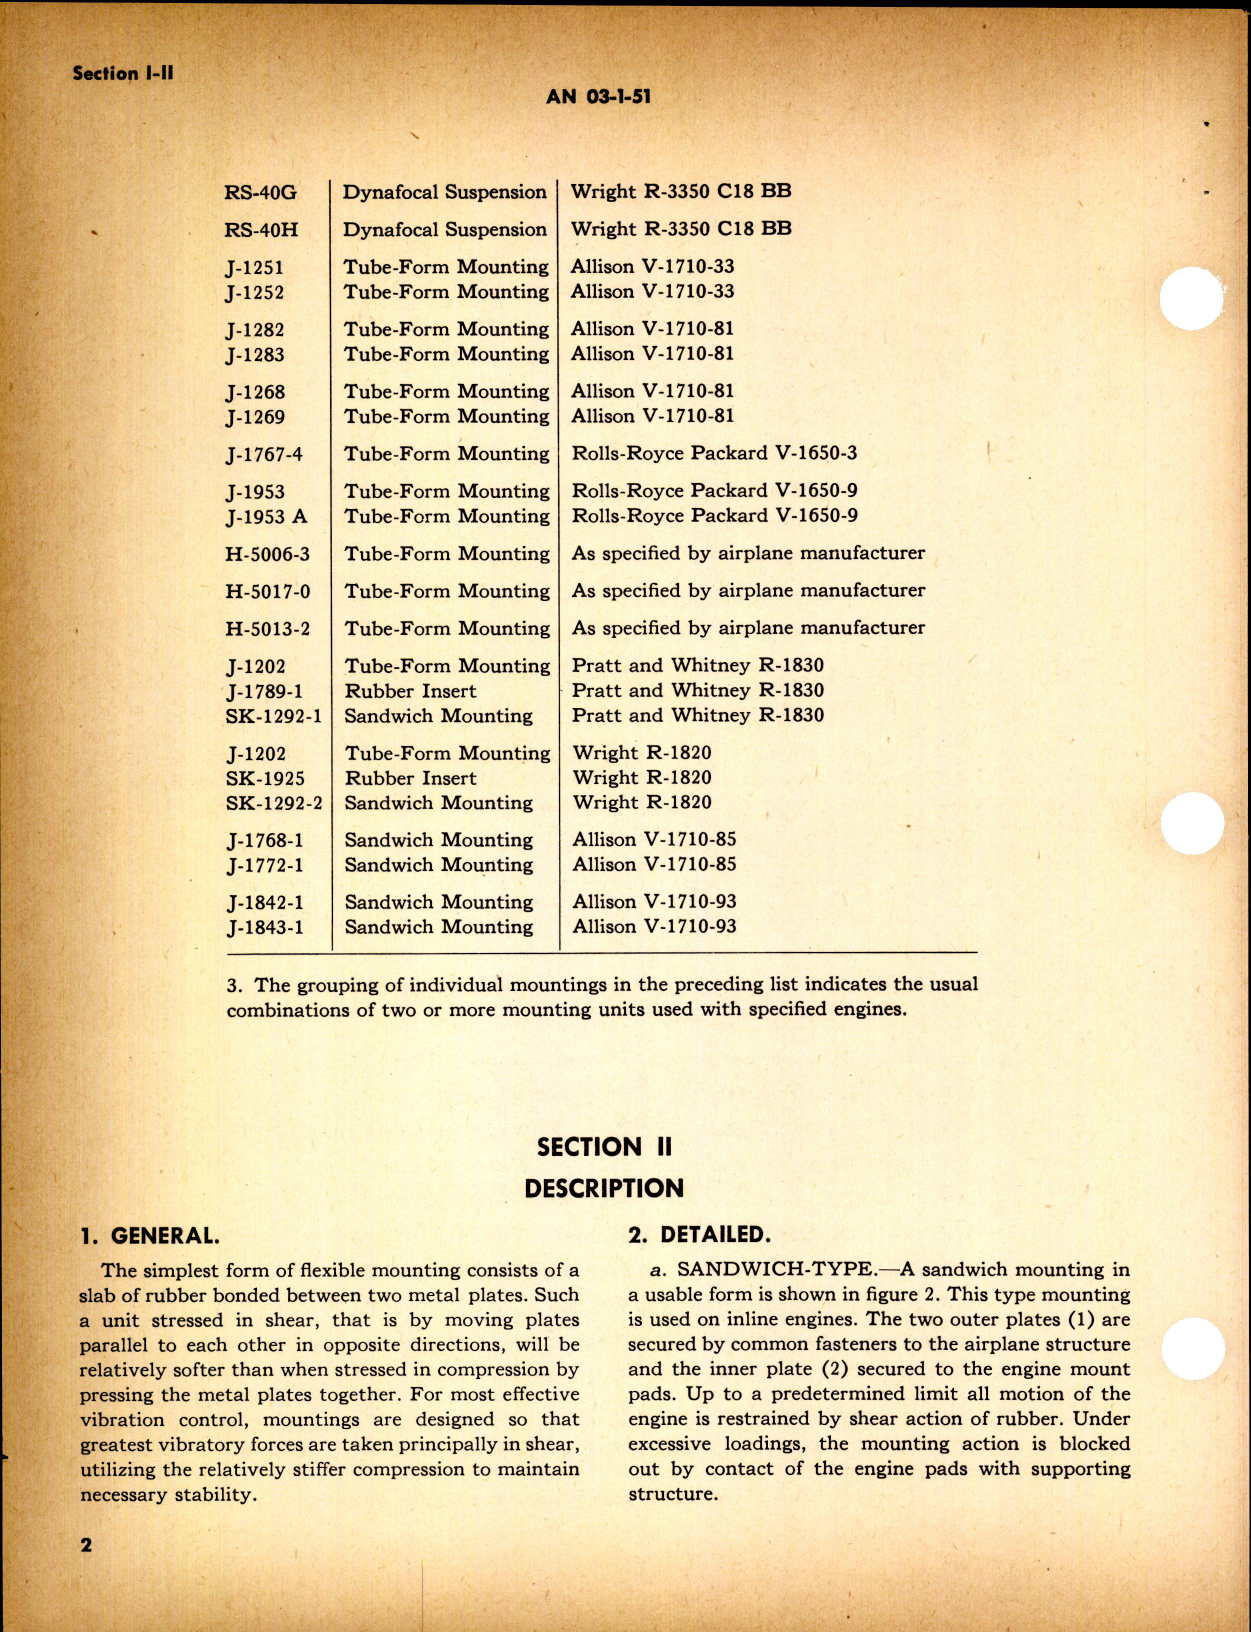 Sample page 6 from AirCorps Library document: Operation, Service, and Overhaul Instructions with Parts Catalog for Engine Mounting Systems